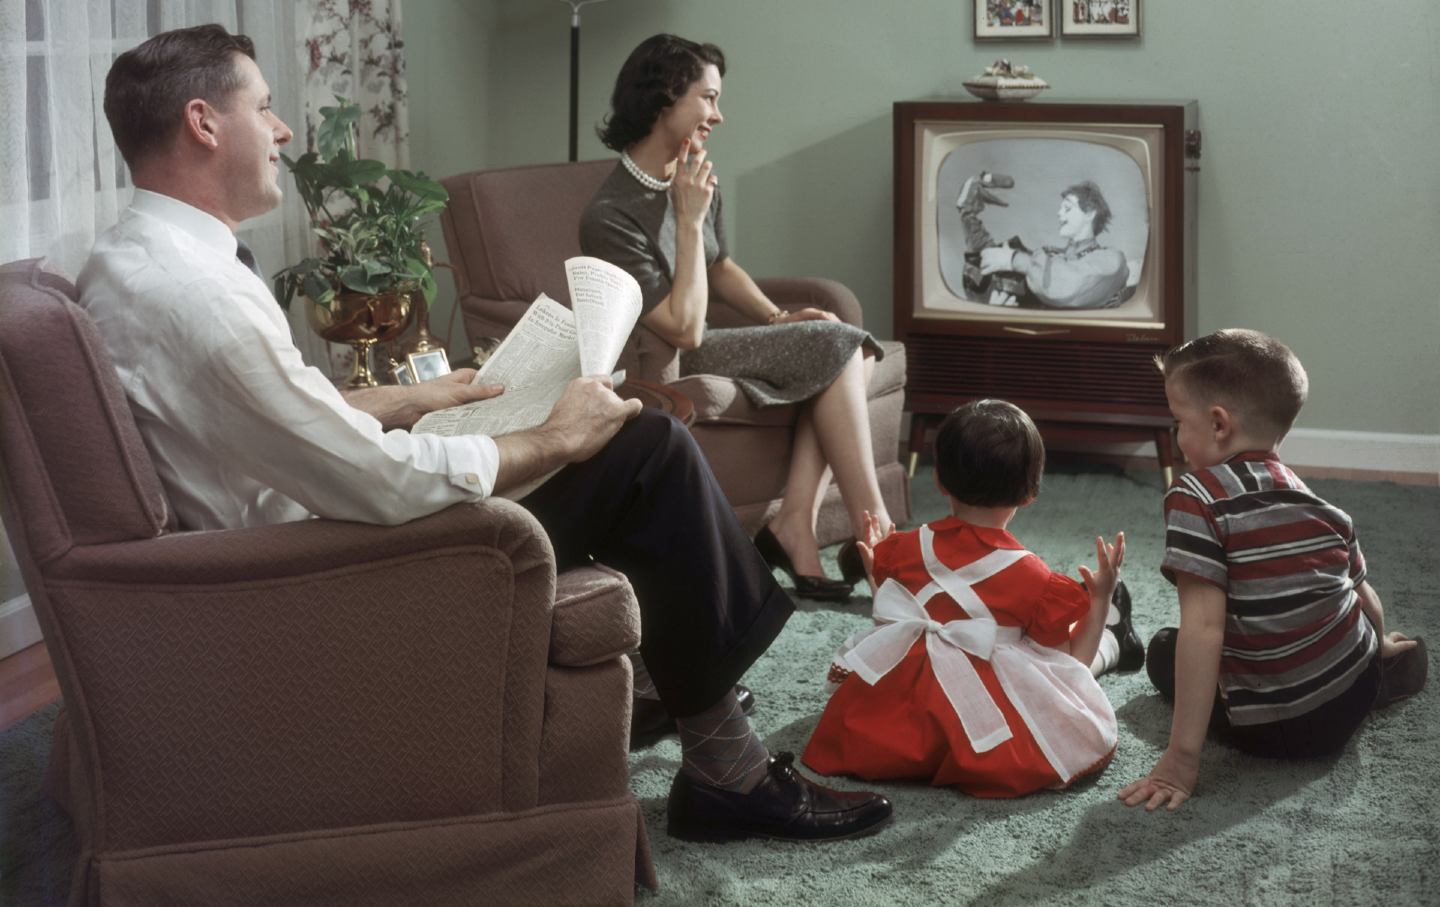 A man, a woman and two children sit around a television.